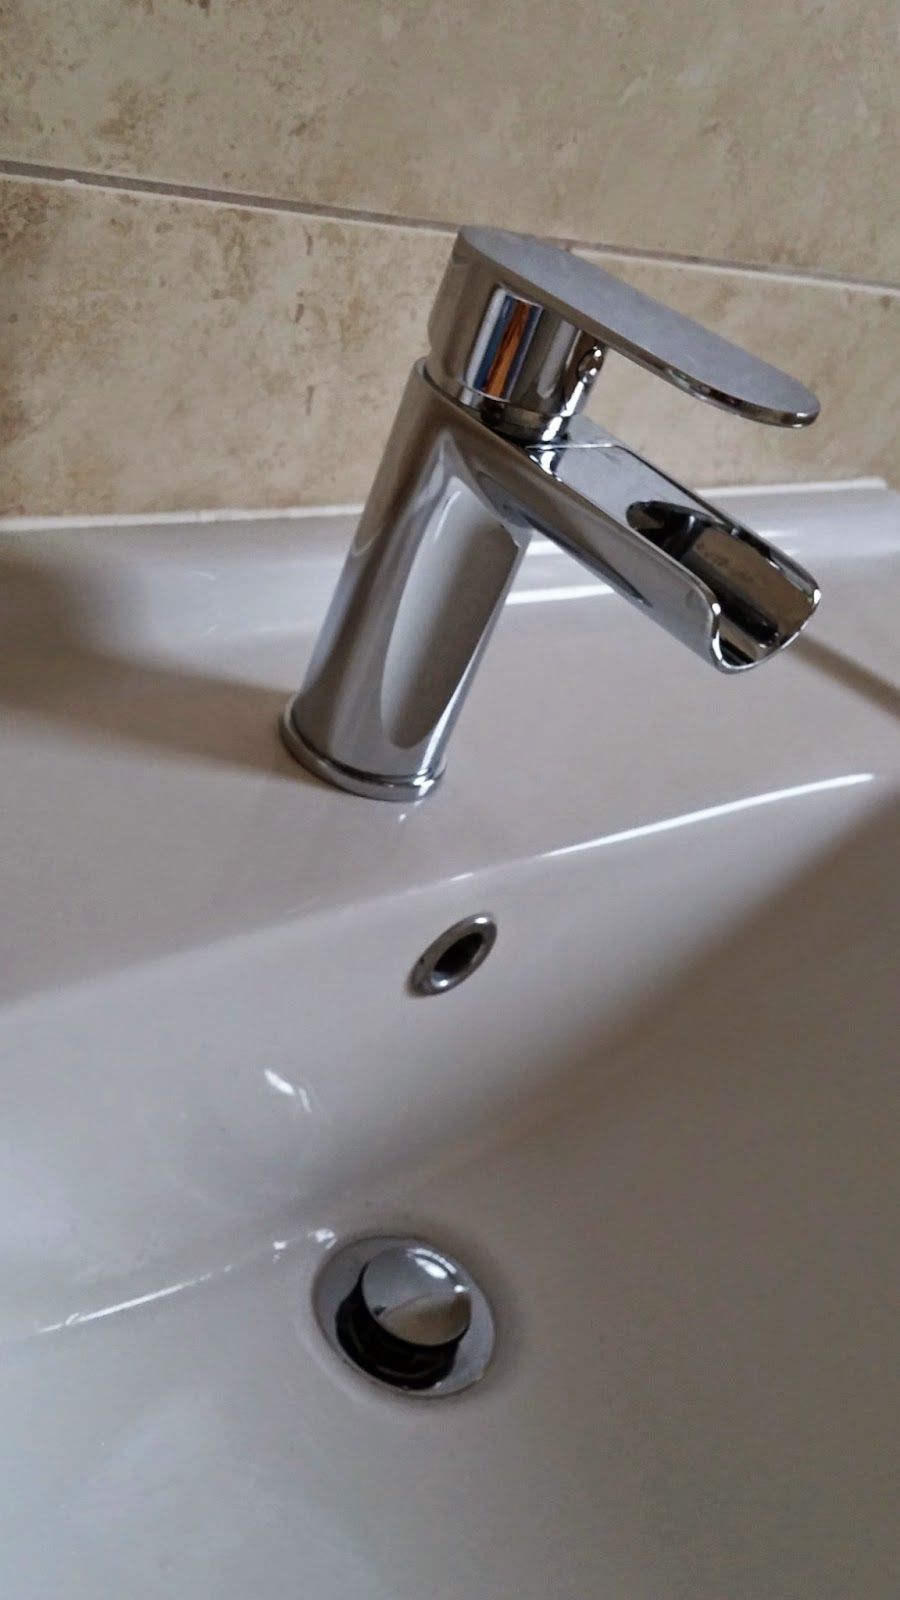 new tap in place